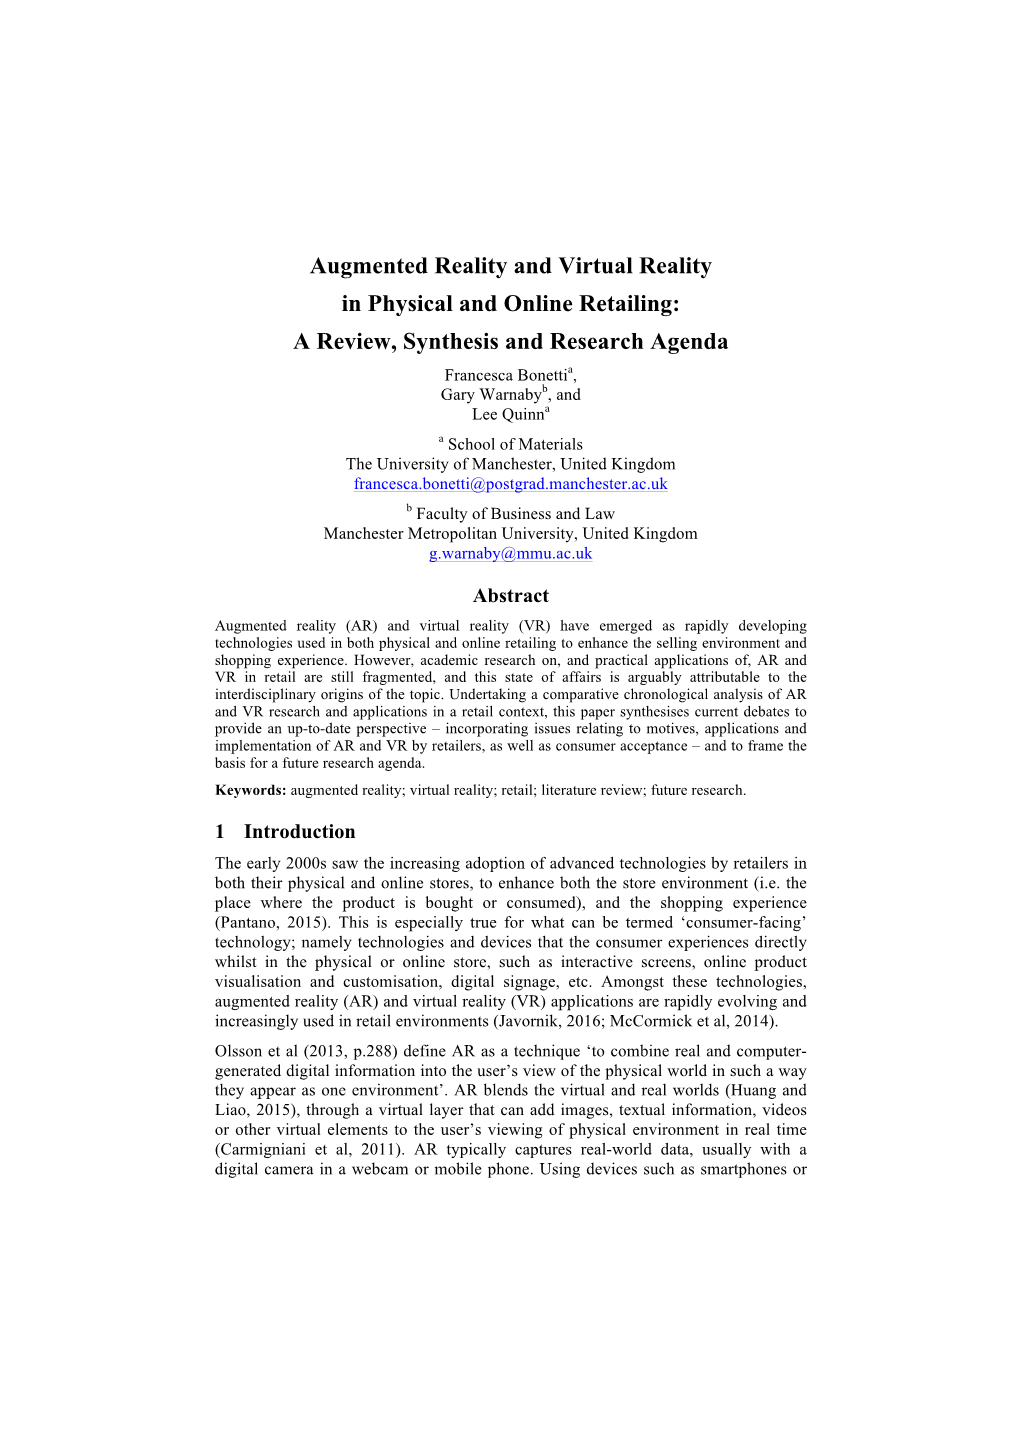 Augmented Reality and Virtual Reality In